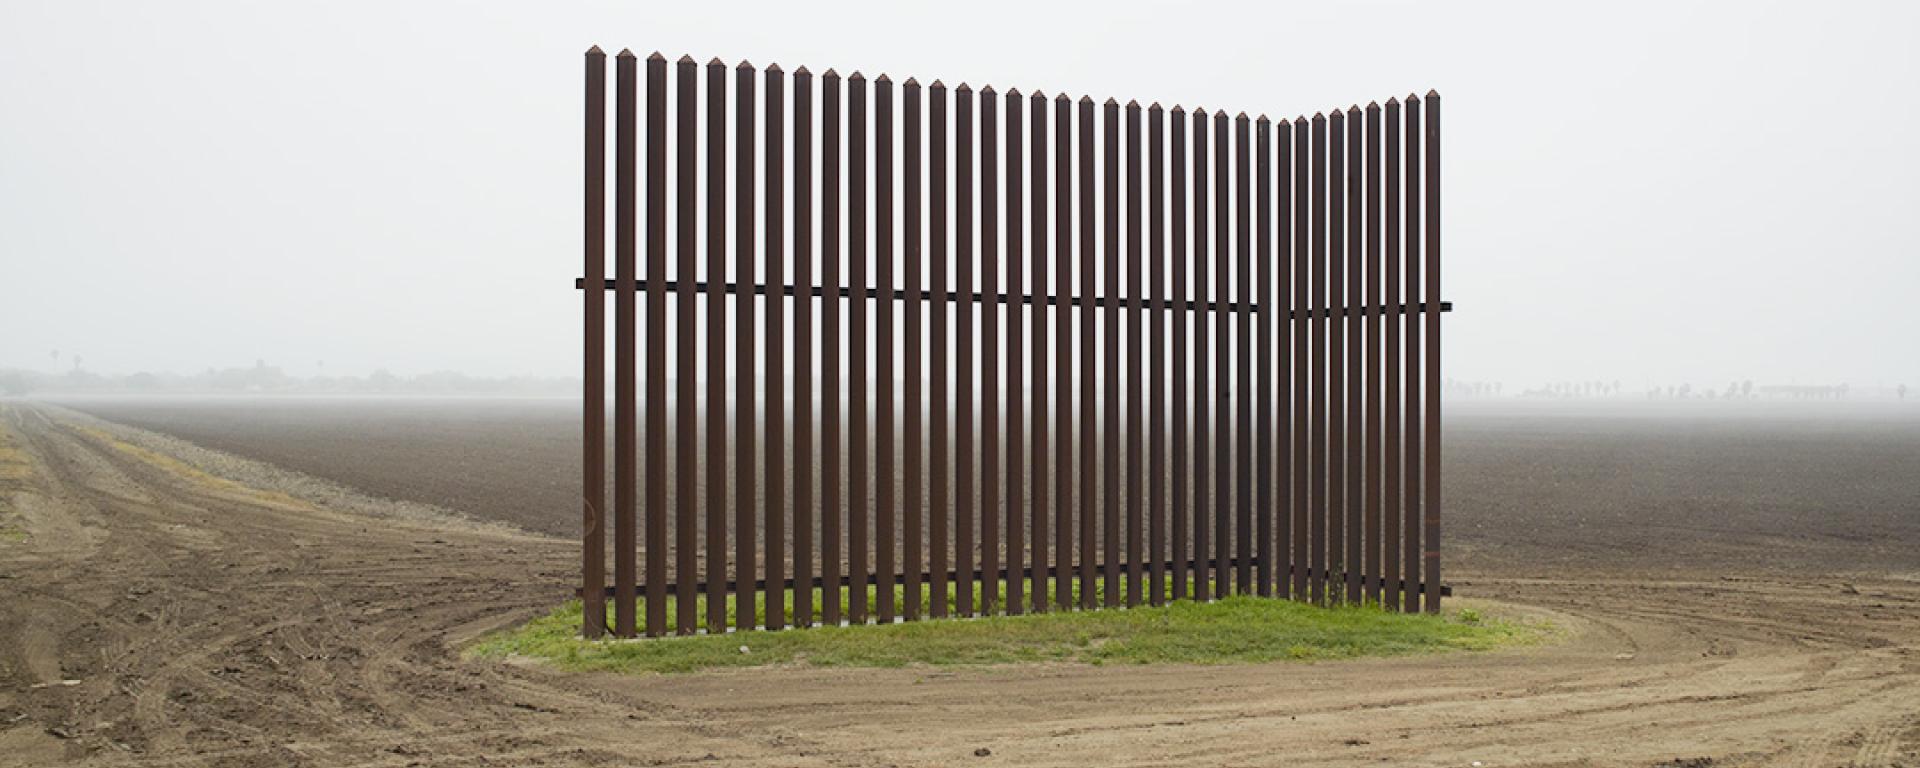 Richard Misrach, Wall, Los Indios, Texas, 2015 / Pace and Pace/MacGill Gallery, New York